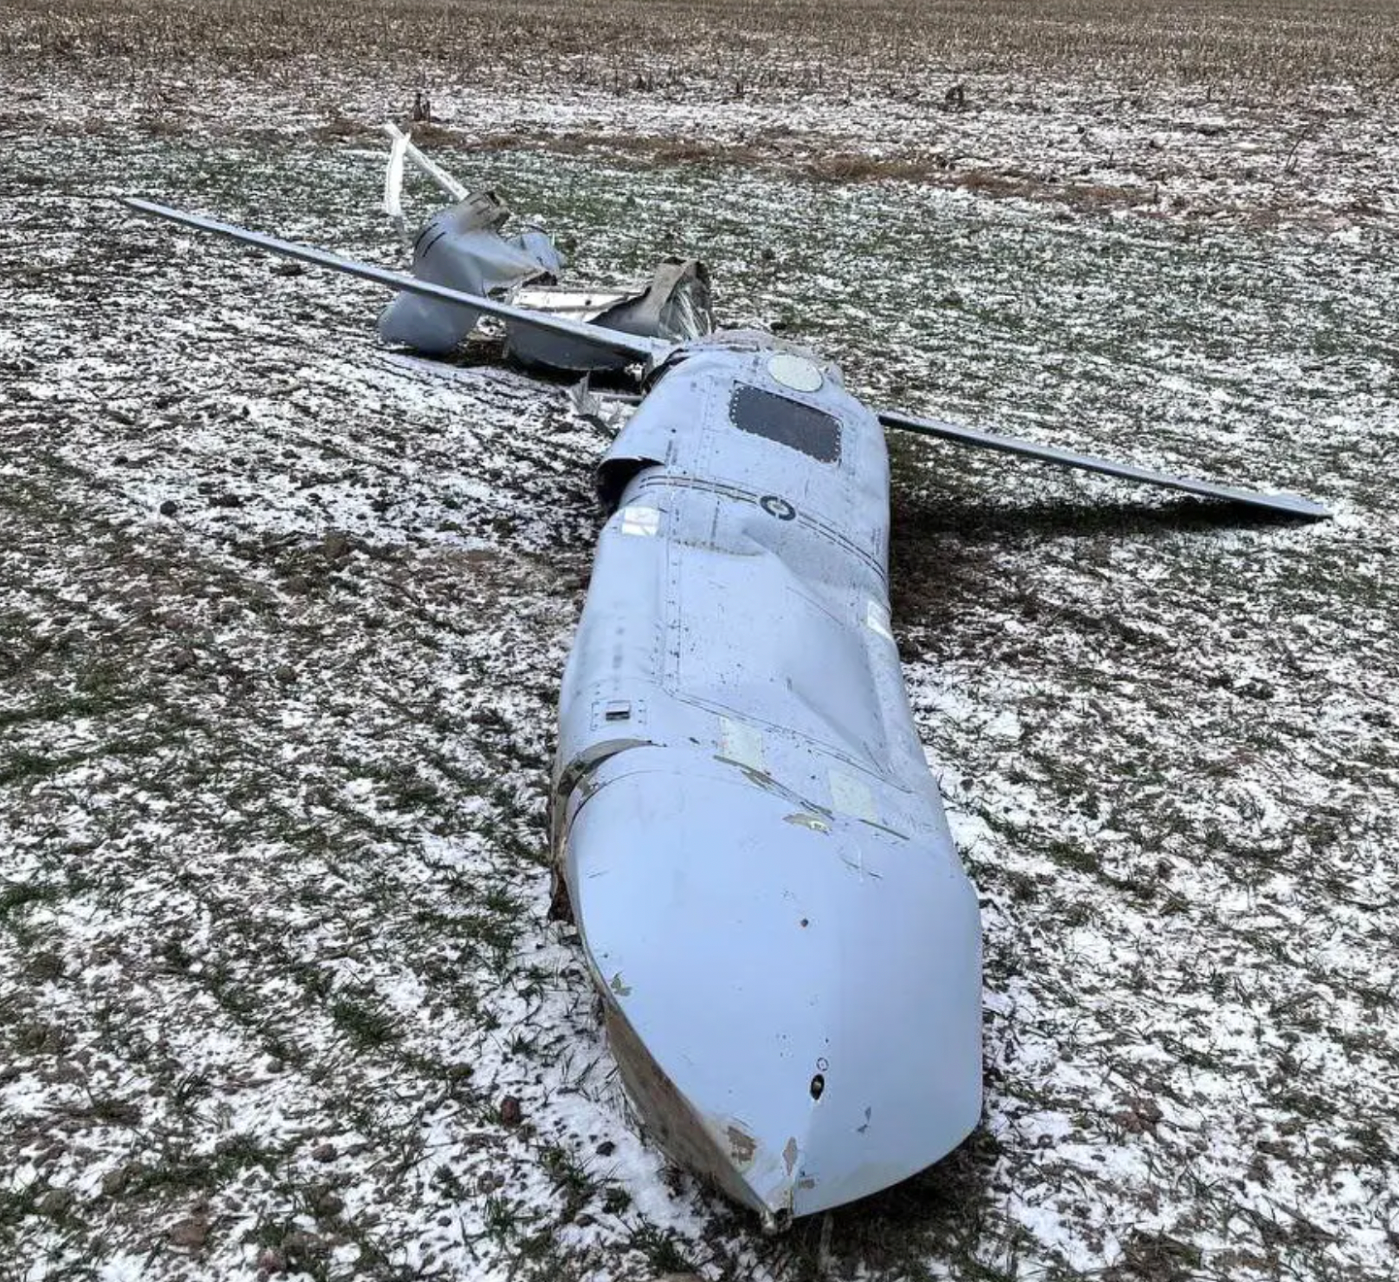 Wreckage of a largely intact Kh-101 reportedly shot down by Ukrainian forces in the central Vinnytsia region of Ukraine in January 2023.&nbsp;<em>Ukrainian Air Force</em>